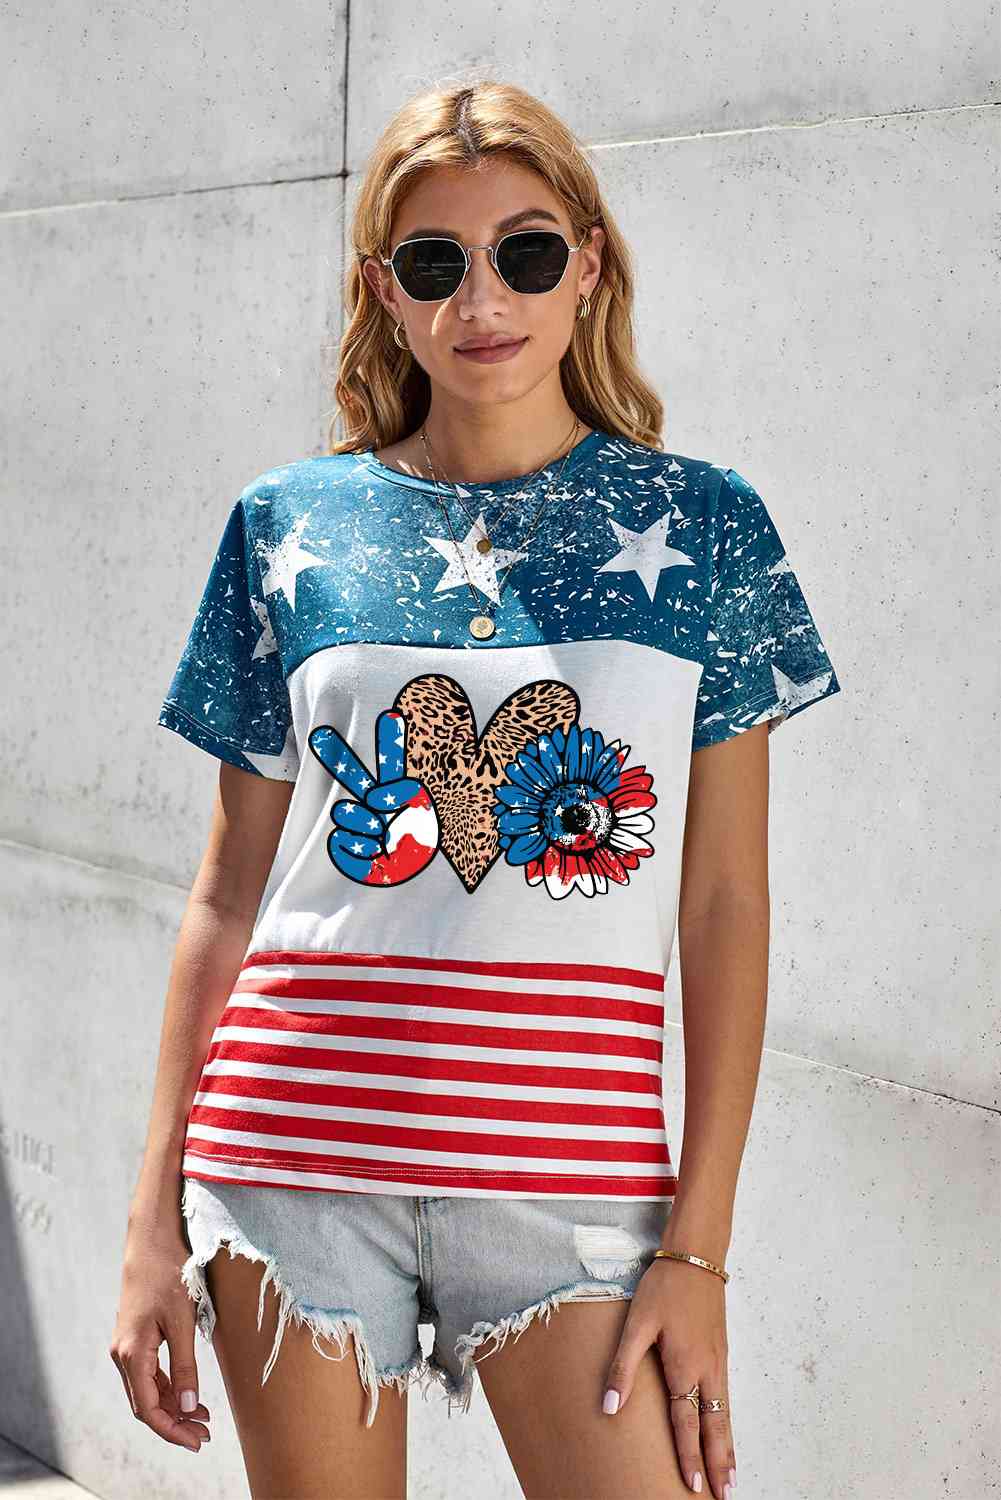 Stars and Stripes Graphic Tee Print on any thing USA/STOD clothes